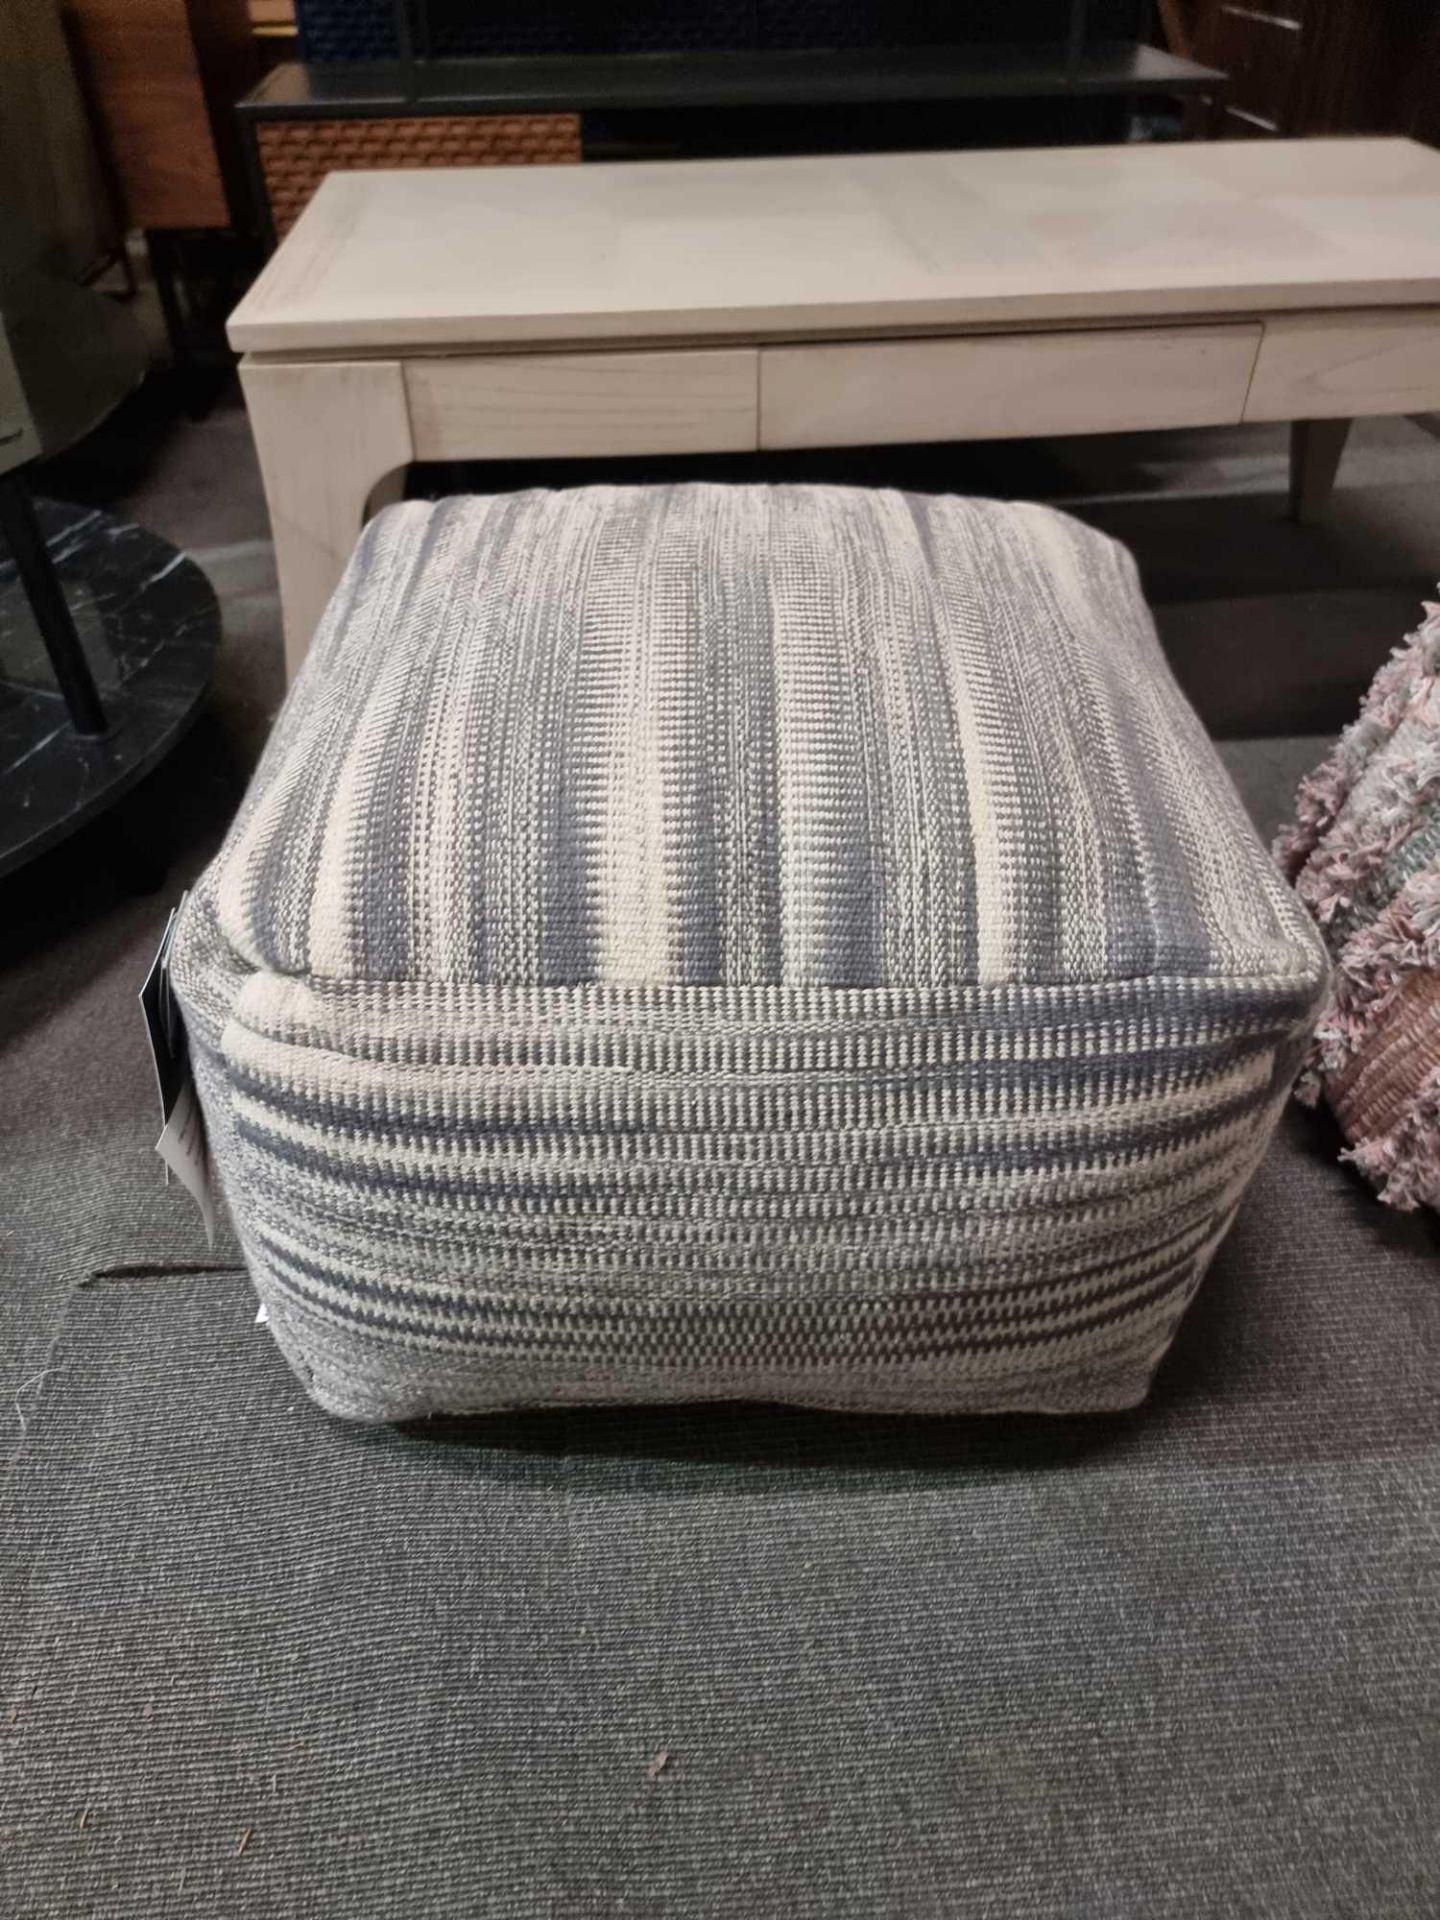 Tivoli Pouffe In Grey Beautifully Detailed And Textured, Add Some Character And Warmth To Your